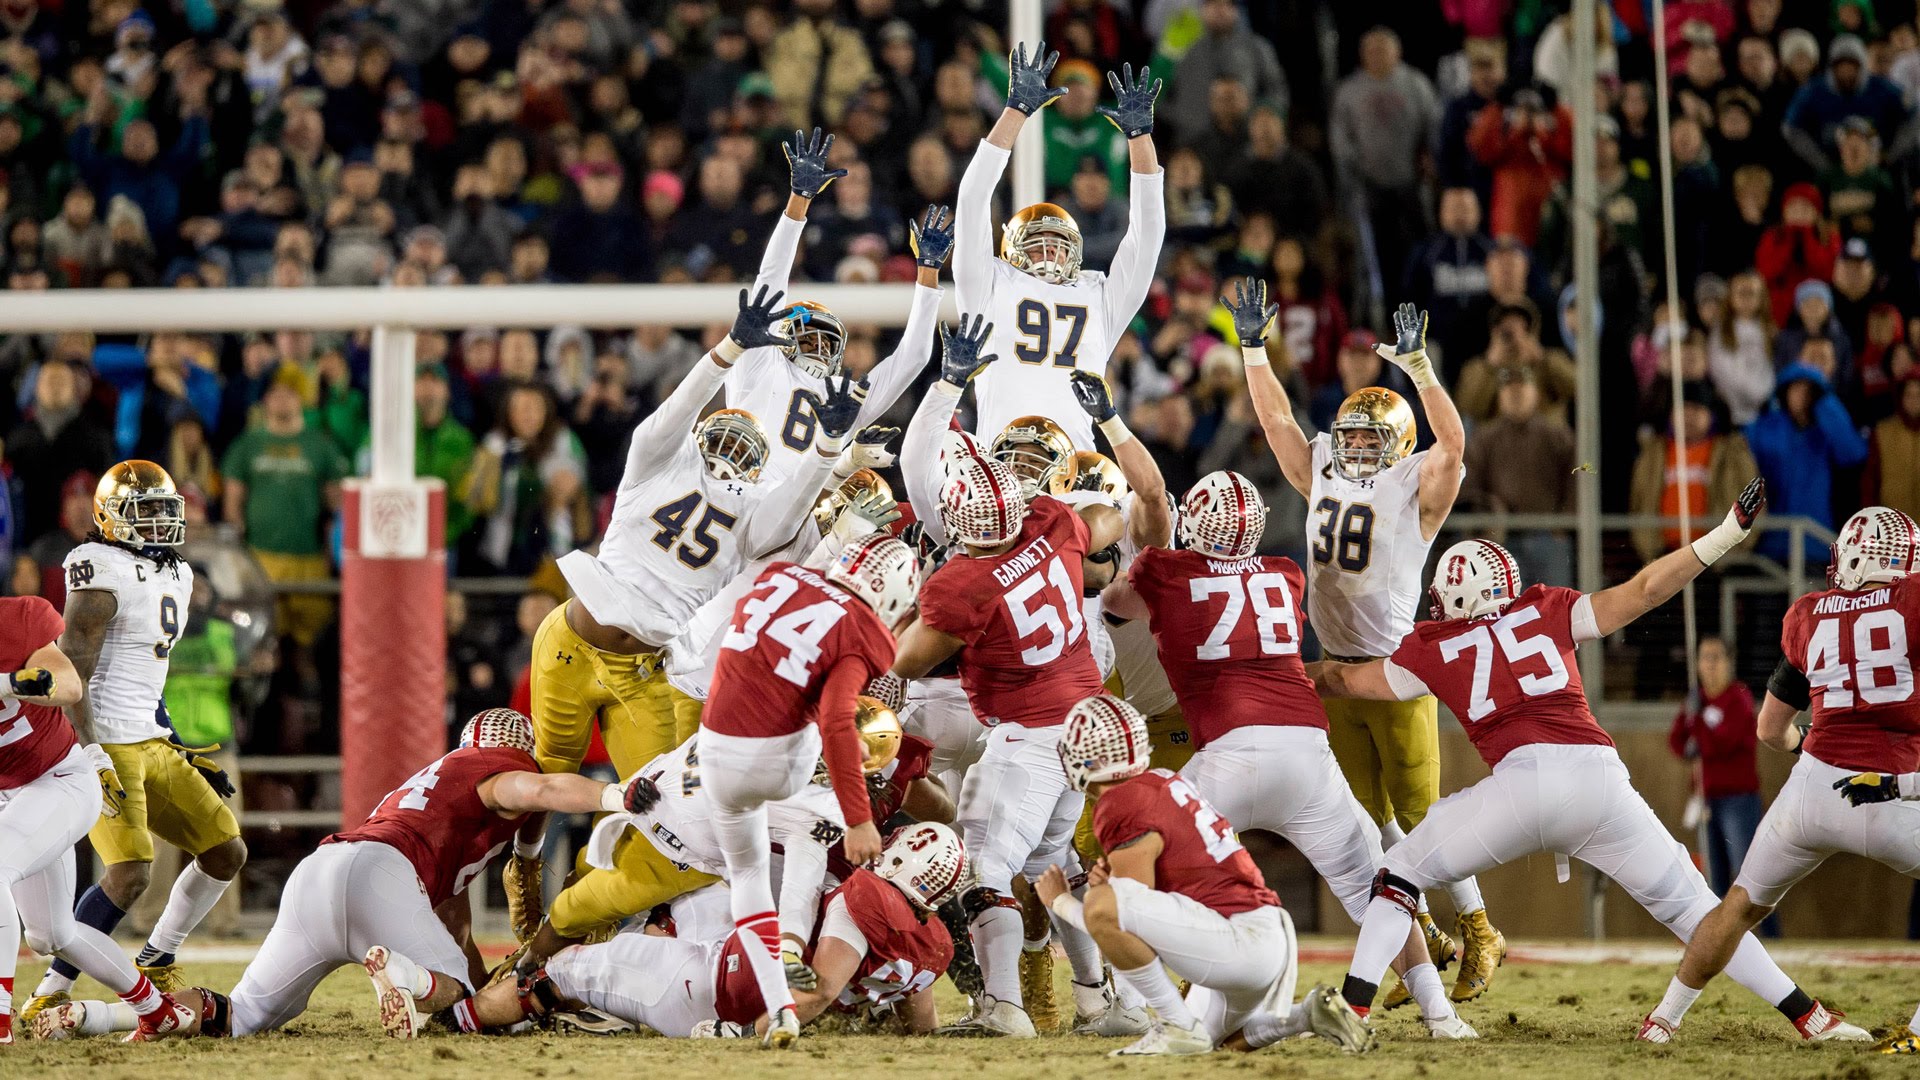 Notre Dame vs Stanford Preview and Pick on the Point Spread